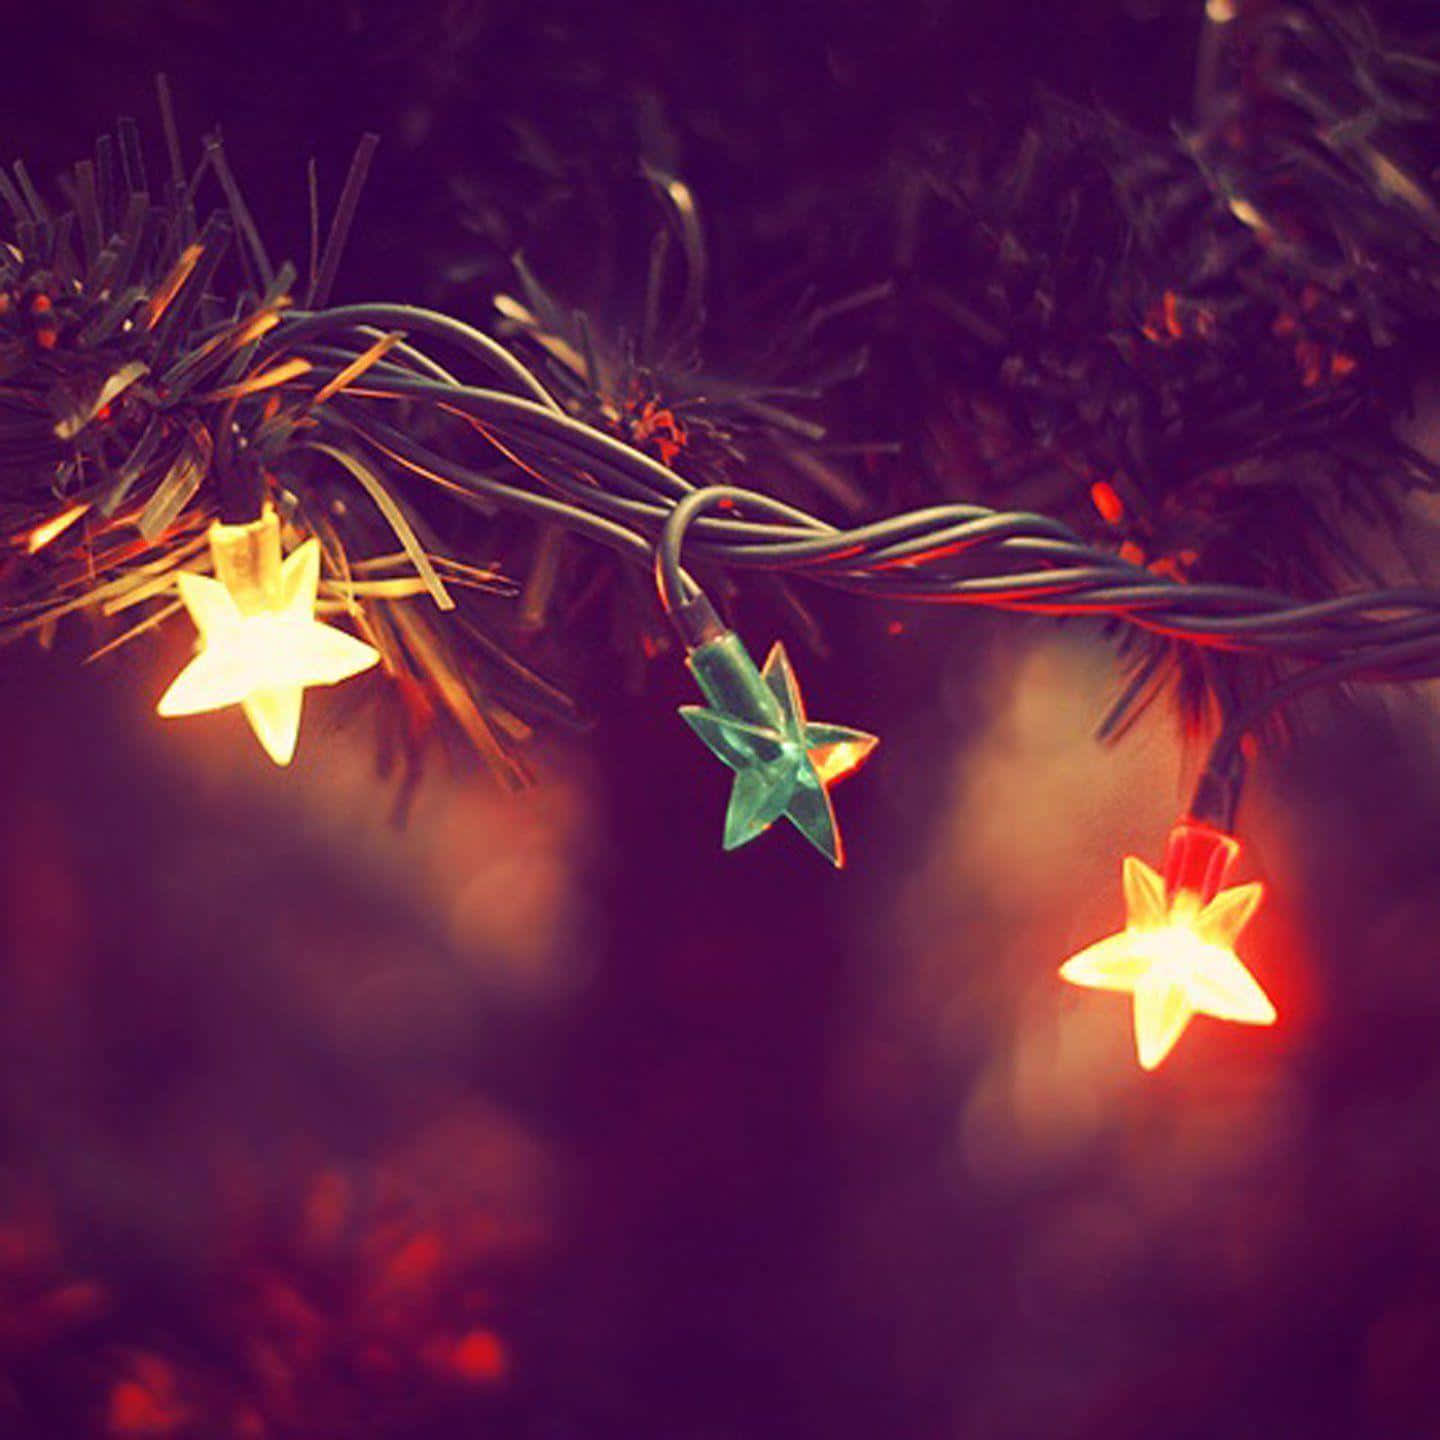 Let the twinkle of Christmas Star light up your home this holiday season. Wallpaper